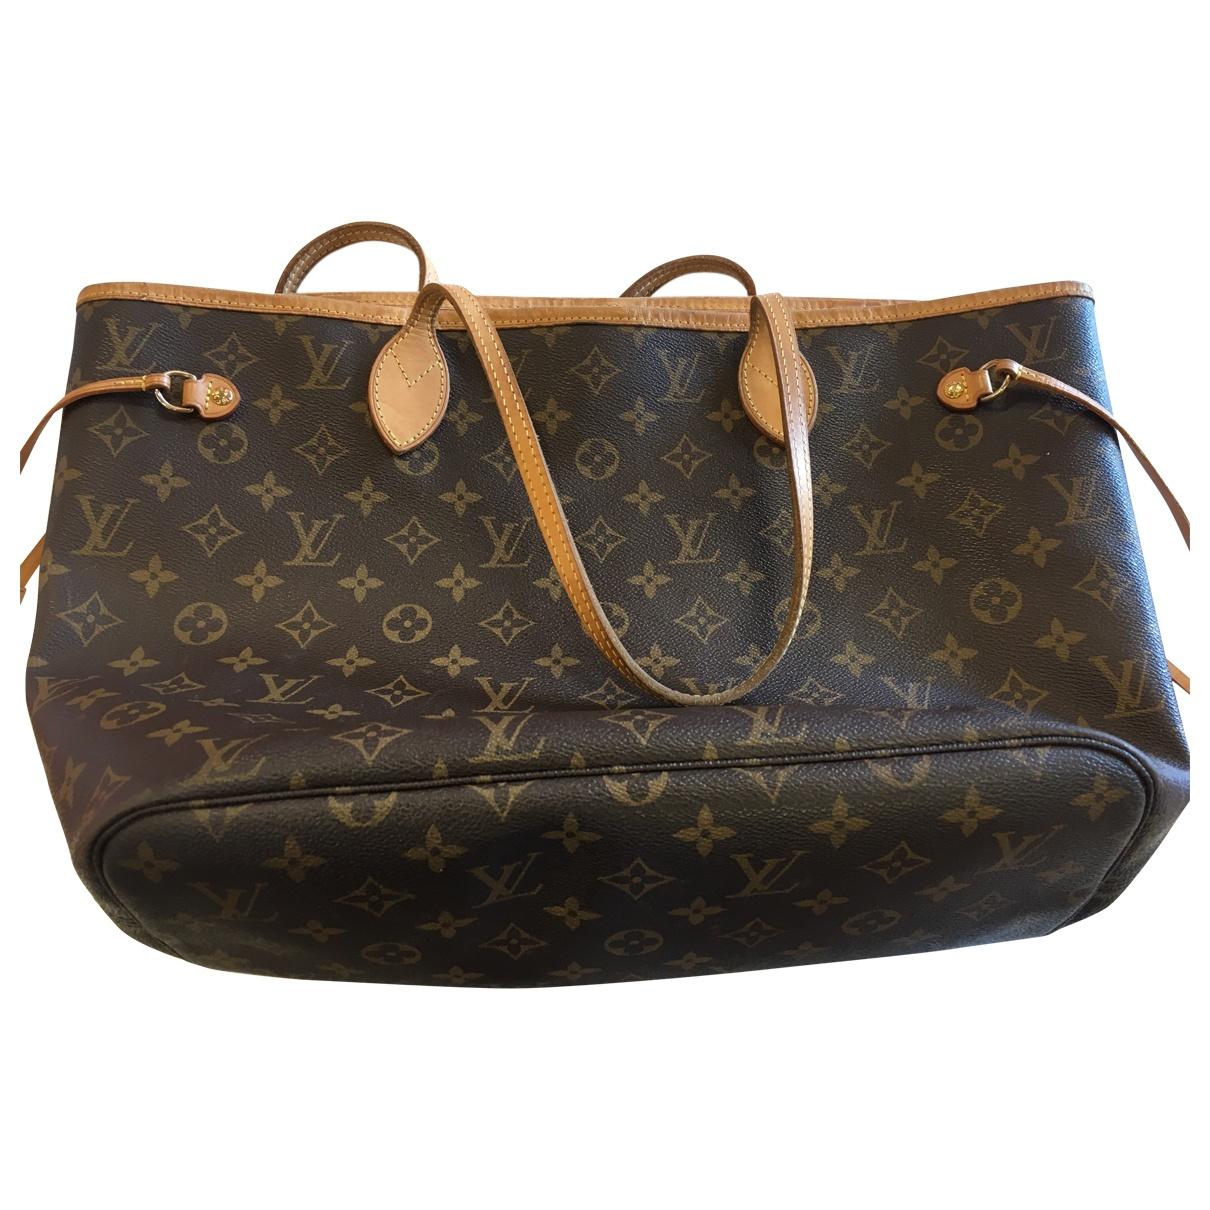 Louis Vuitton Neverfull Leather Handbag in Brown - Lyst